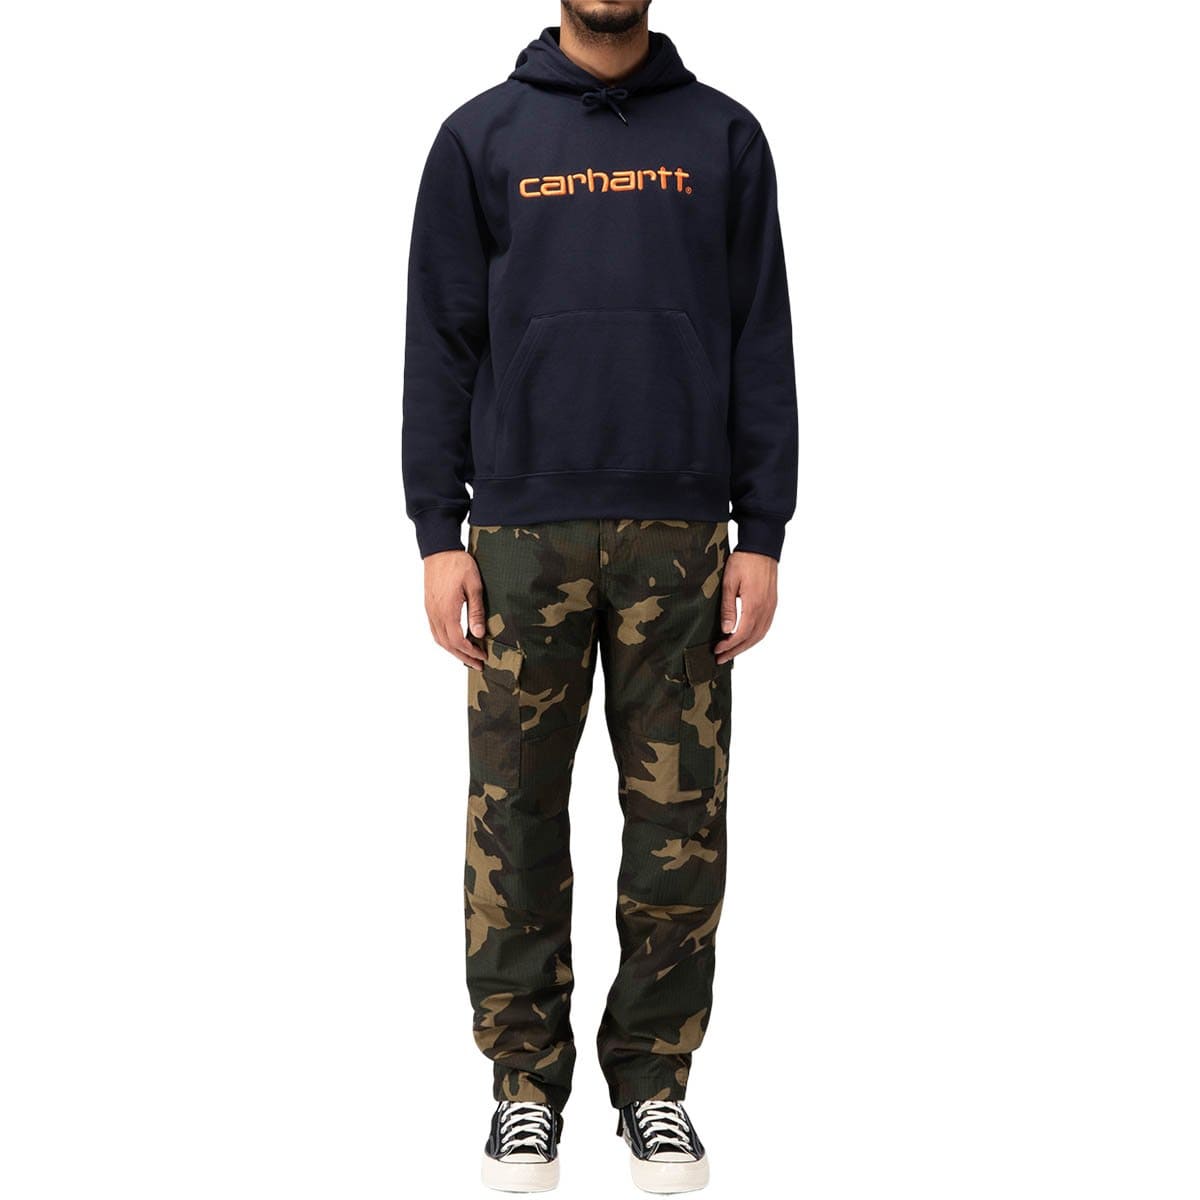 Andesbjergene Pris Vugge 2022 AVIATION PANT Carhartt WIP Sale at half price - new collection